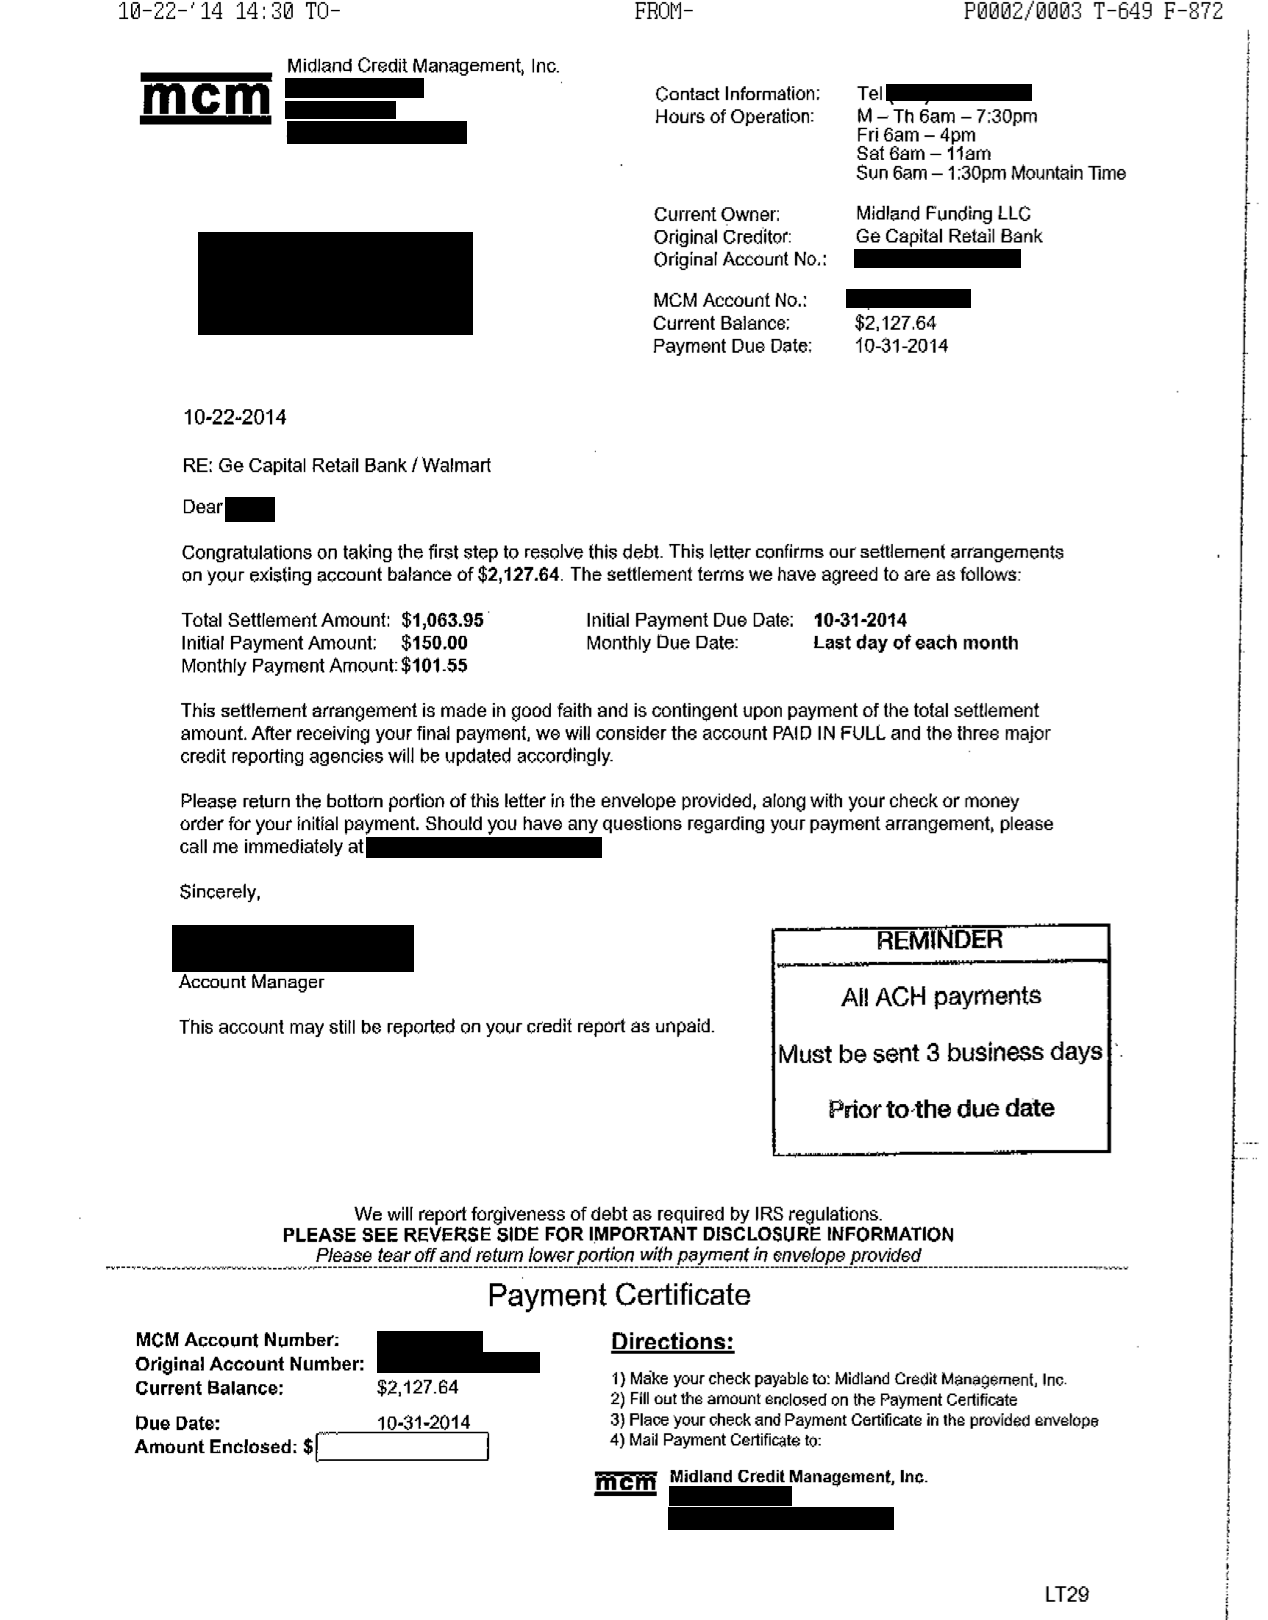 Image of a settlement letter with Ge Capital Retail Bank with savings of 1,064 dollars